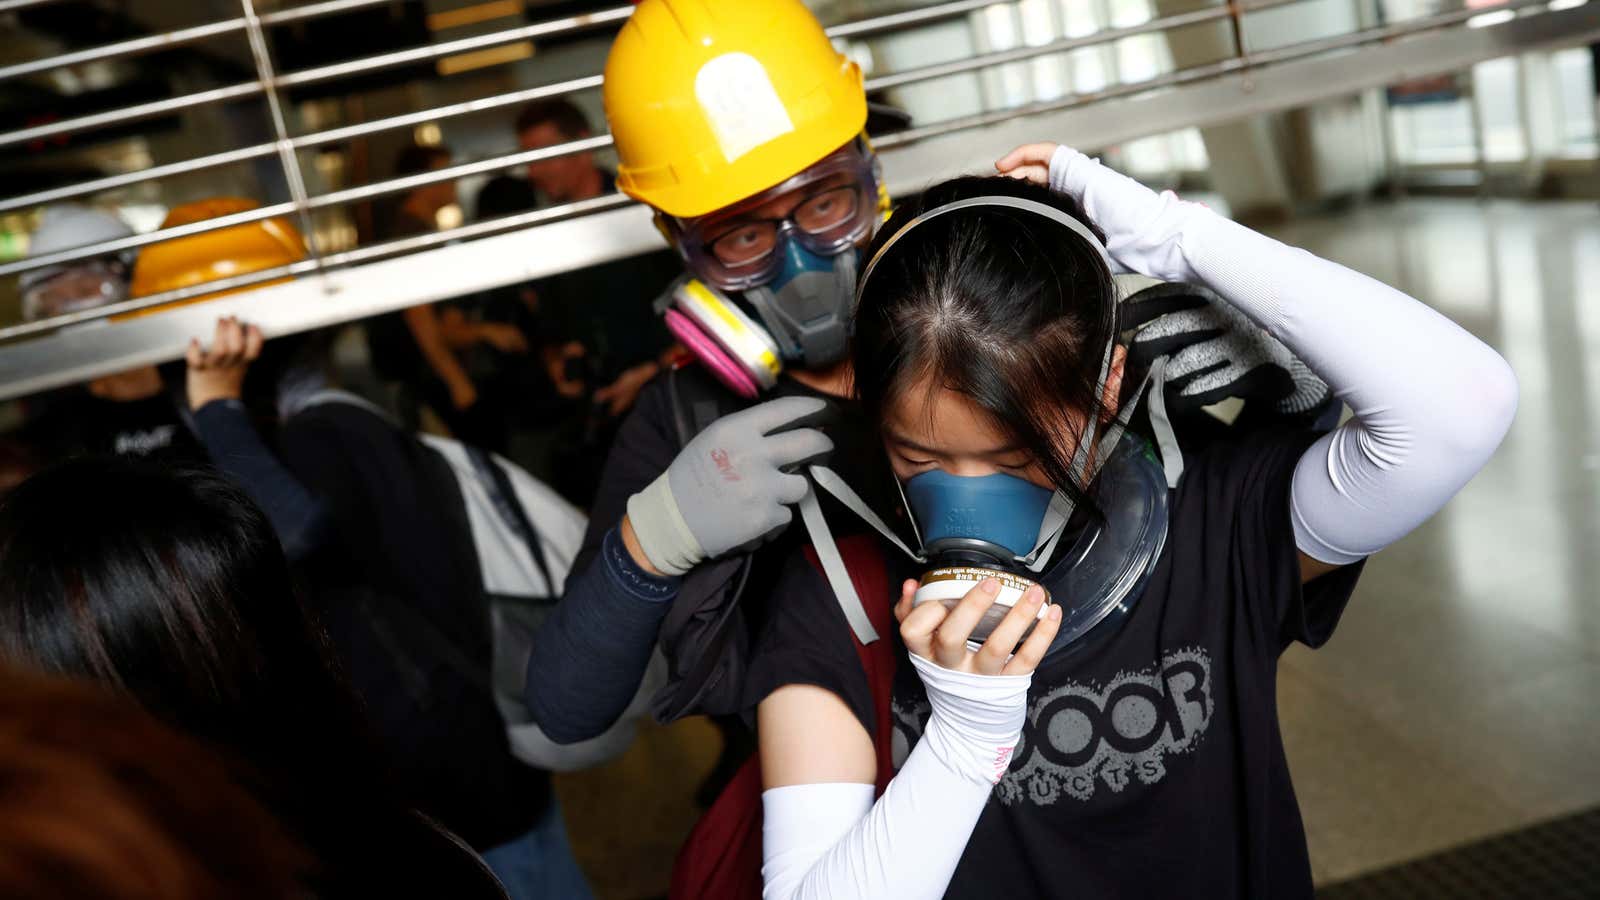 The Hong Kong protests are showing no signs of subsiding.